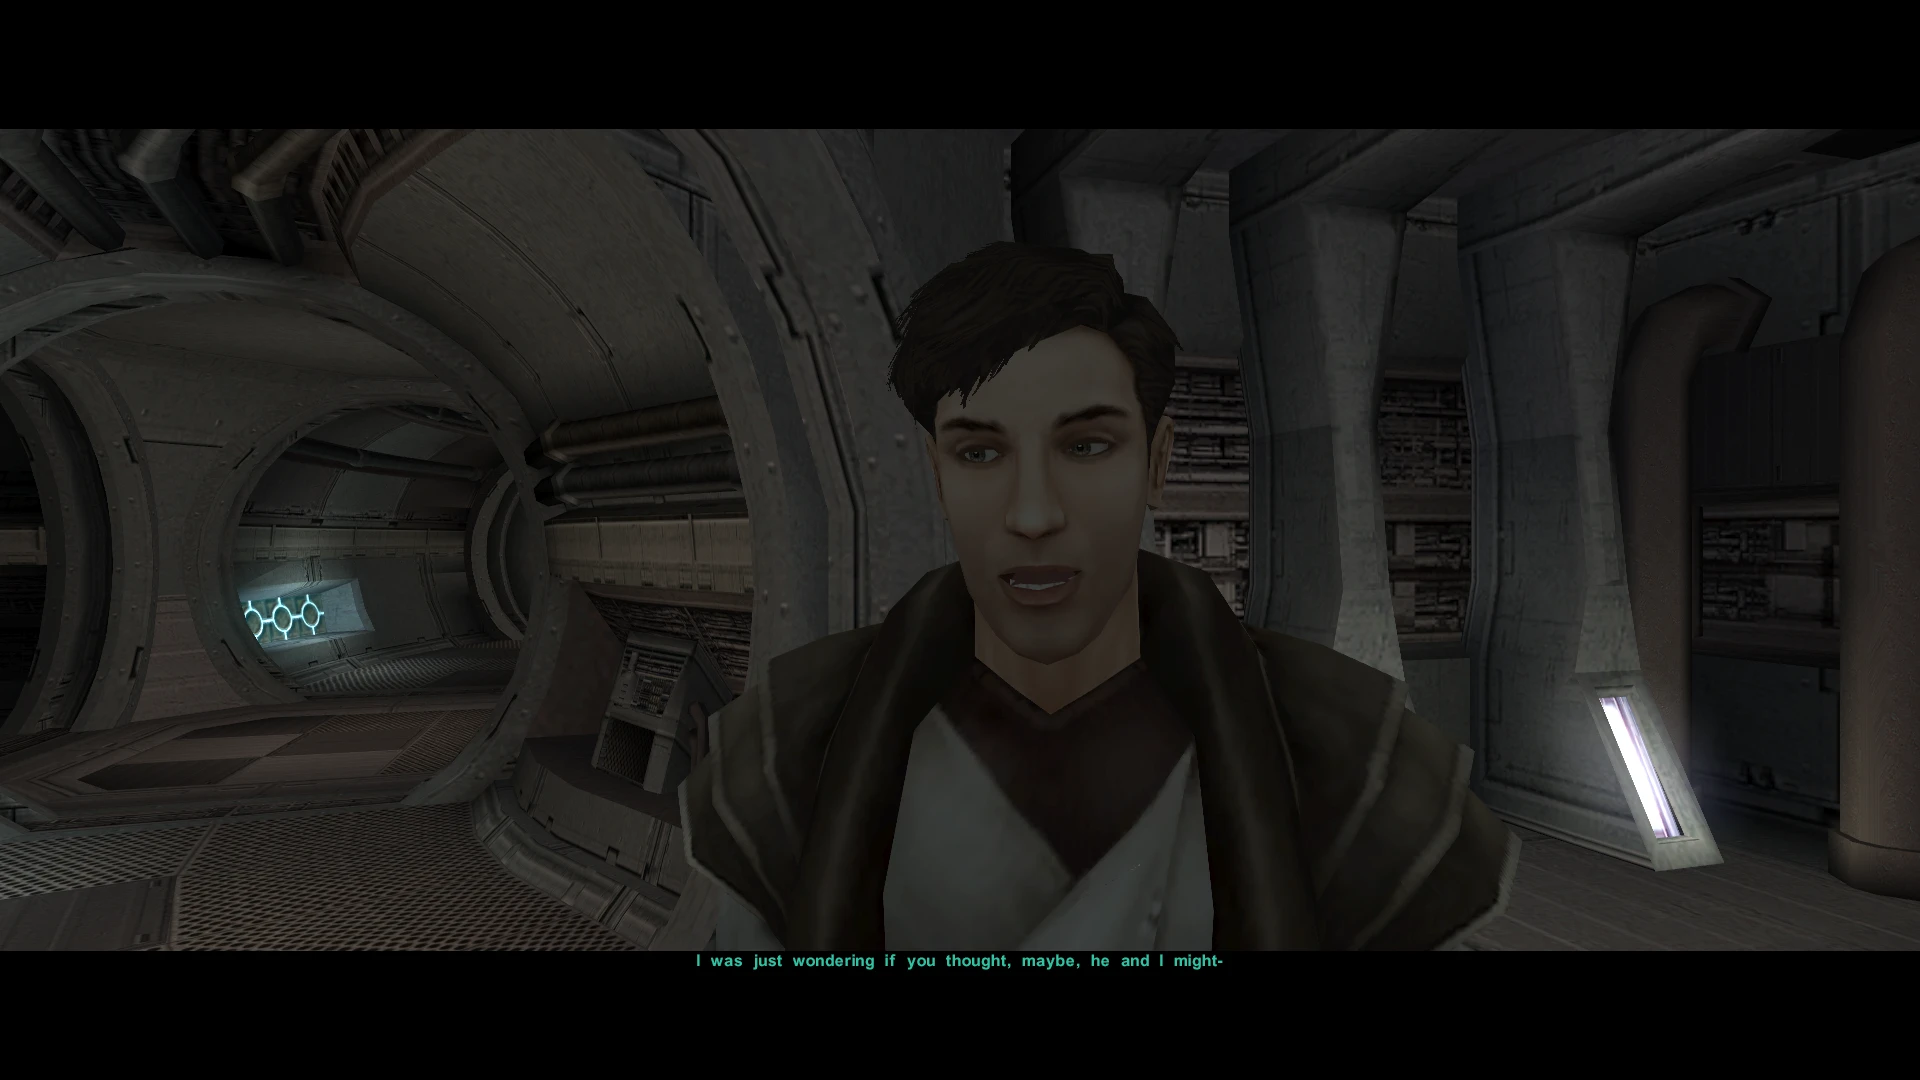 knights of the old republic ii romances